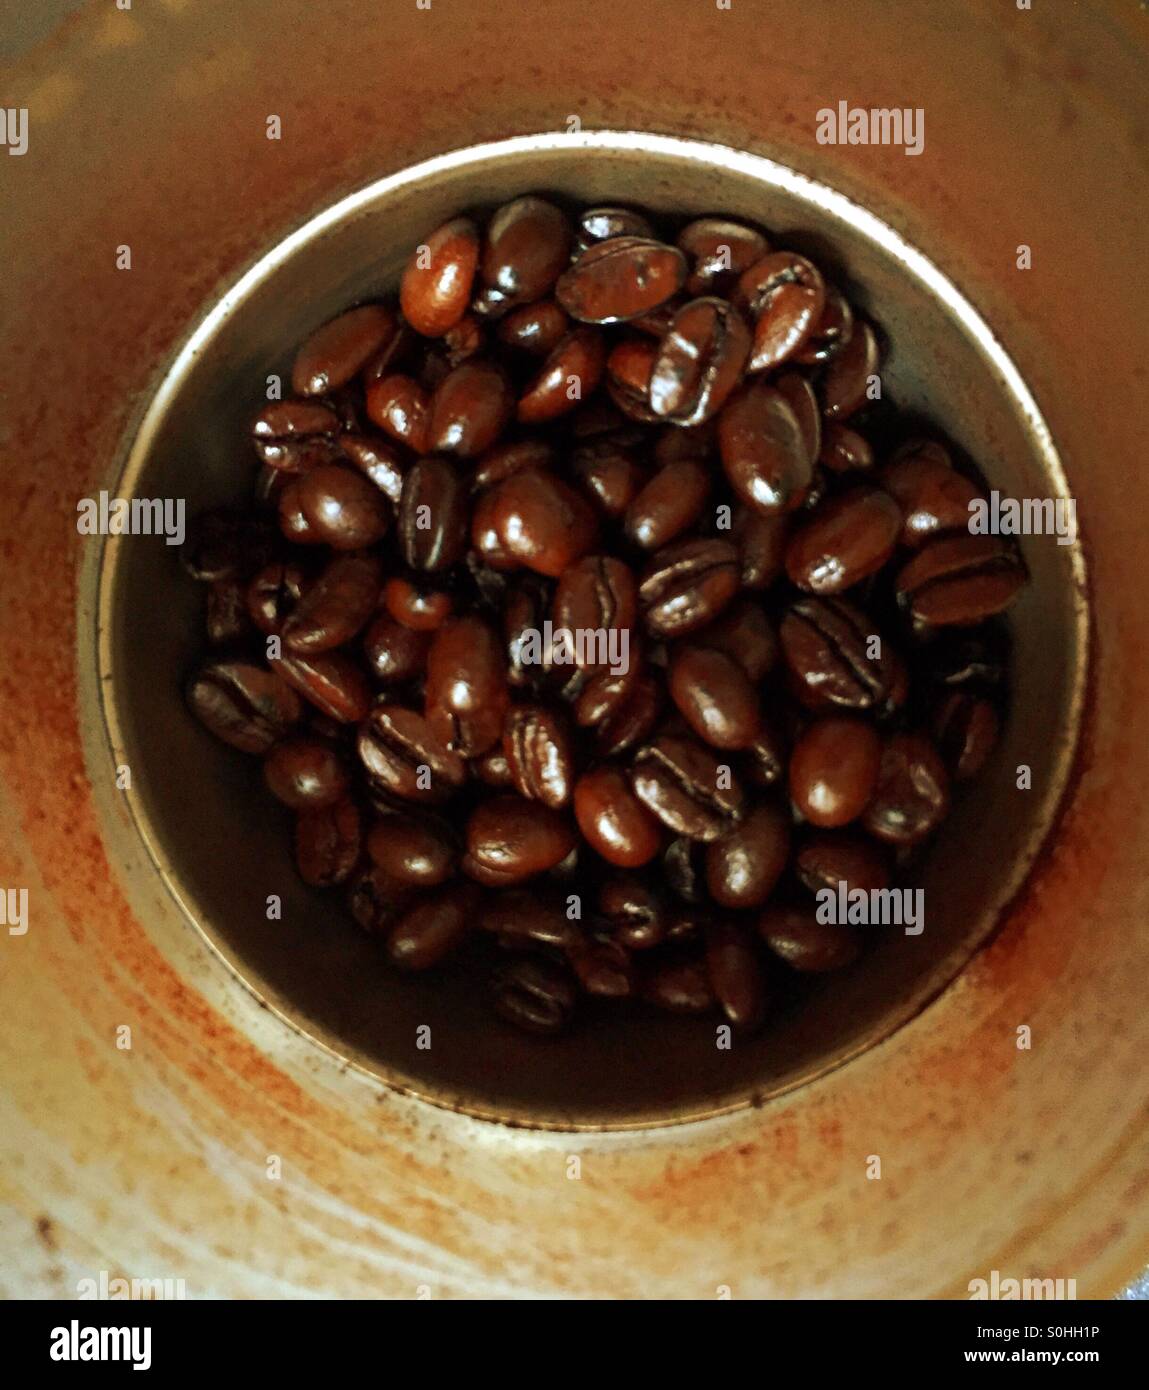 Looking down on coffee beans in a grinder Stock Photo